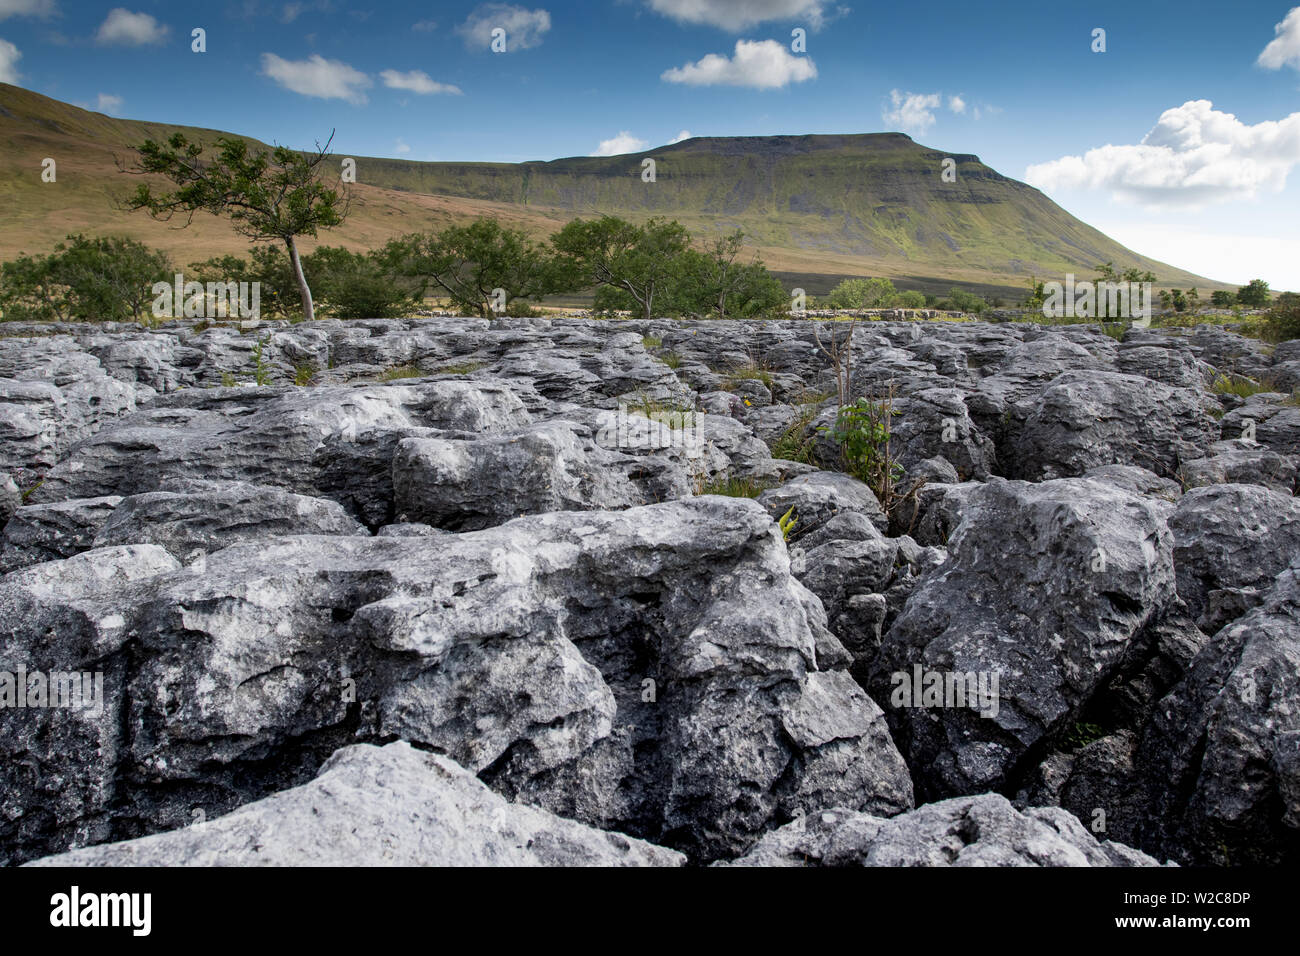 A view of Ingleborough, Yorkshire across the Norber boulder field at the base. Stock Photo